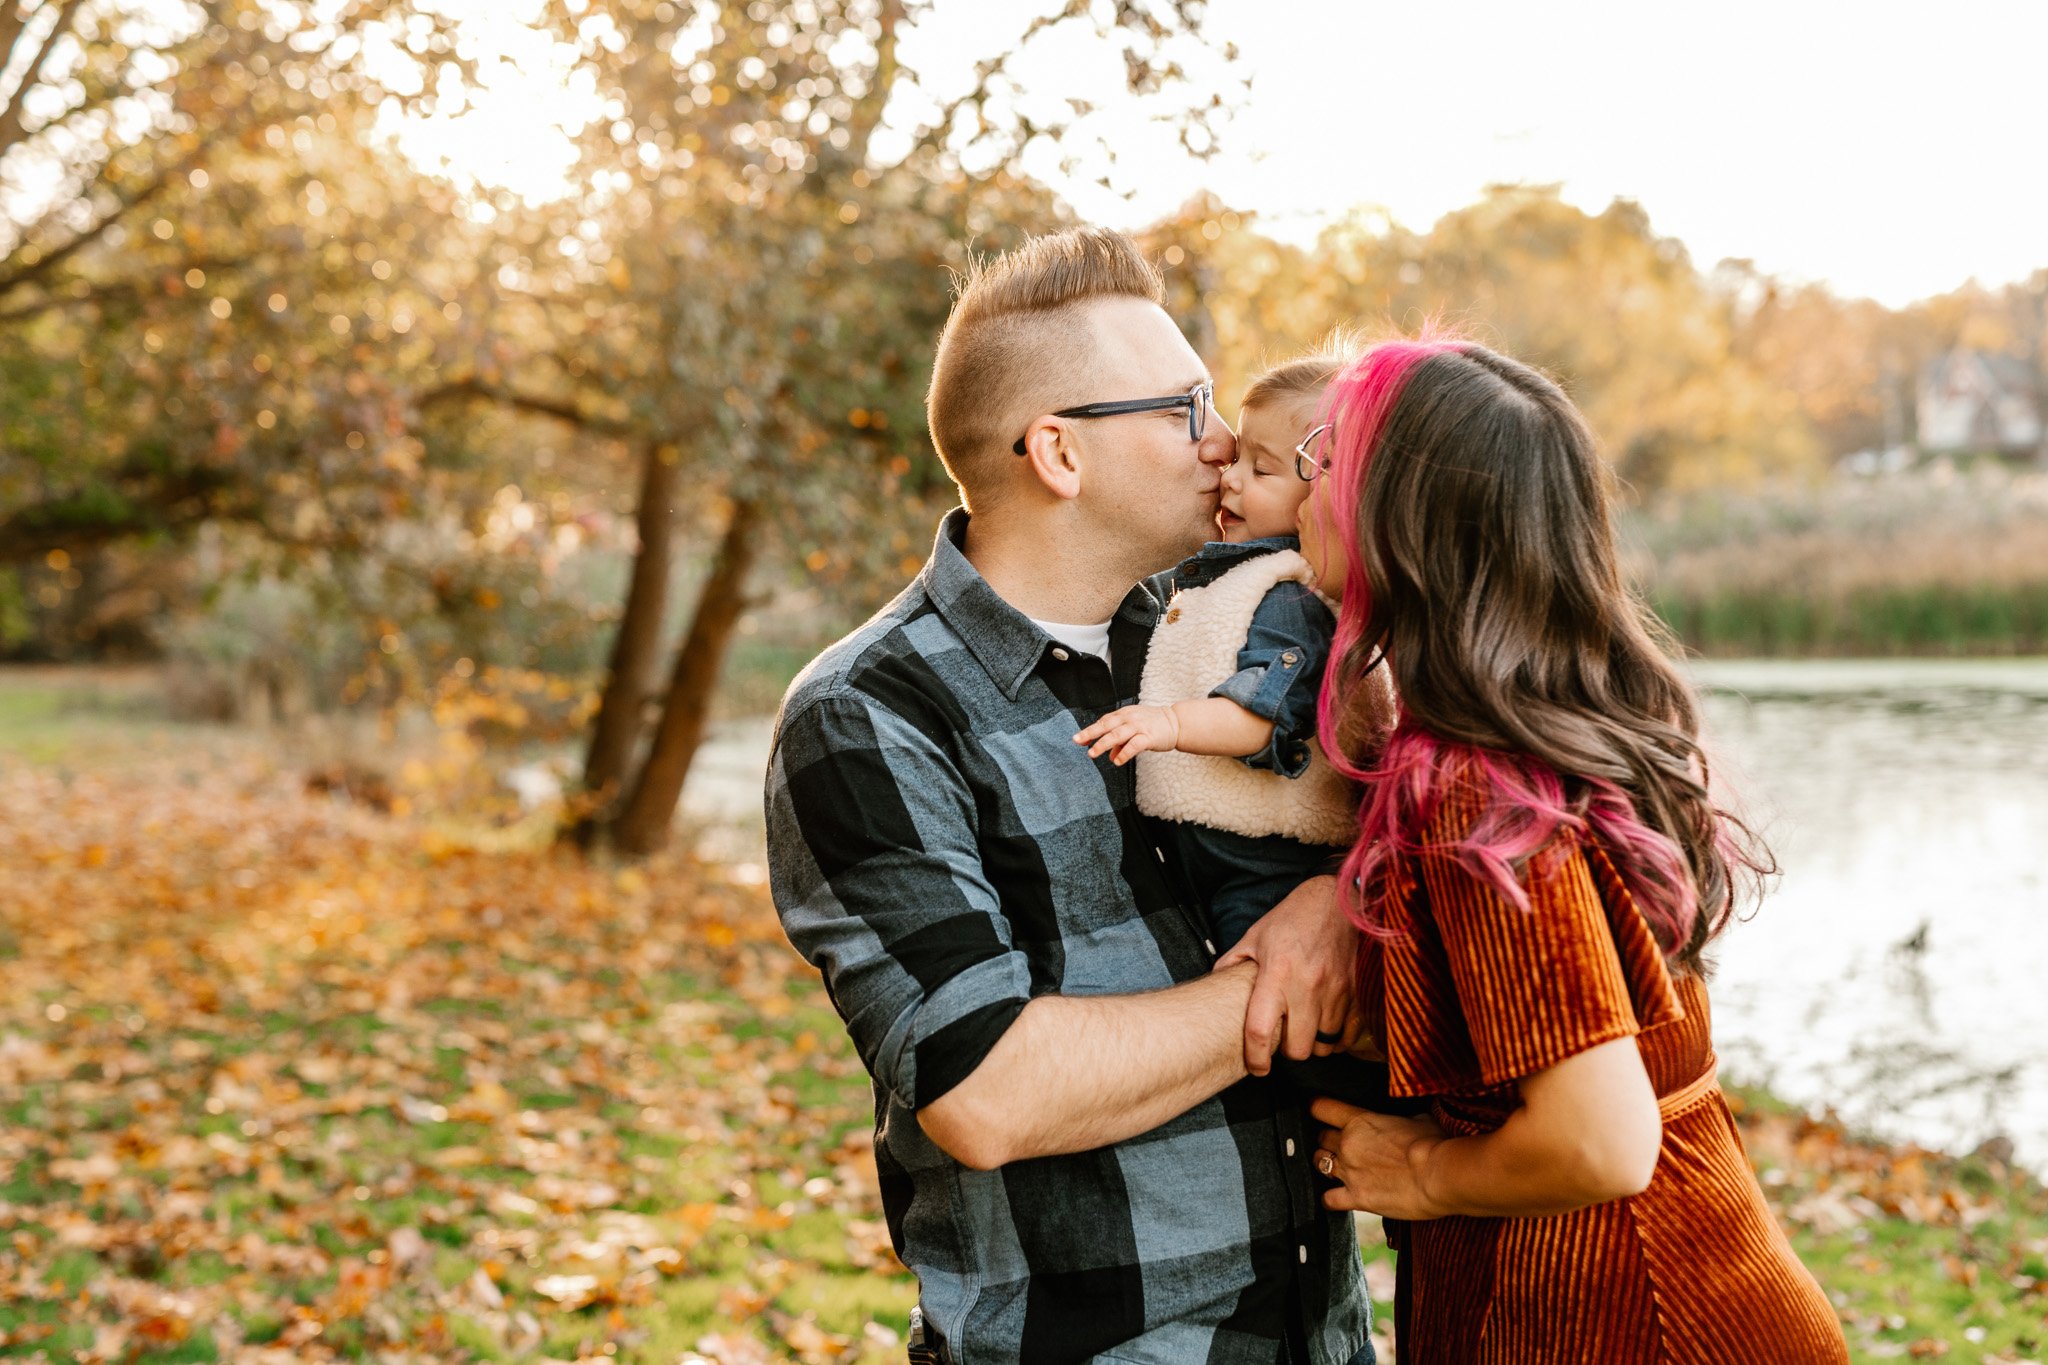  Mother and father kiss their toddler on the face during family pictures with Nicole Hawkins Photography. family poses #NicoleHawkinsPhotography #NicoleHawkinsFamily #fallfamilyphotos #fallphotos #familyphotographerNJ #NJfallfamilypics 